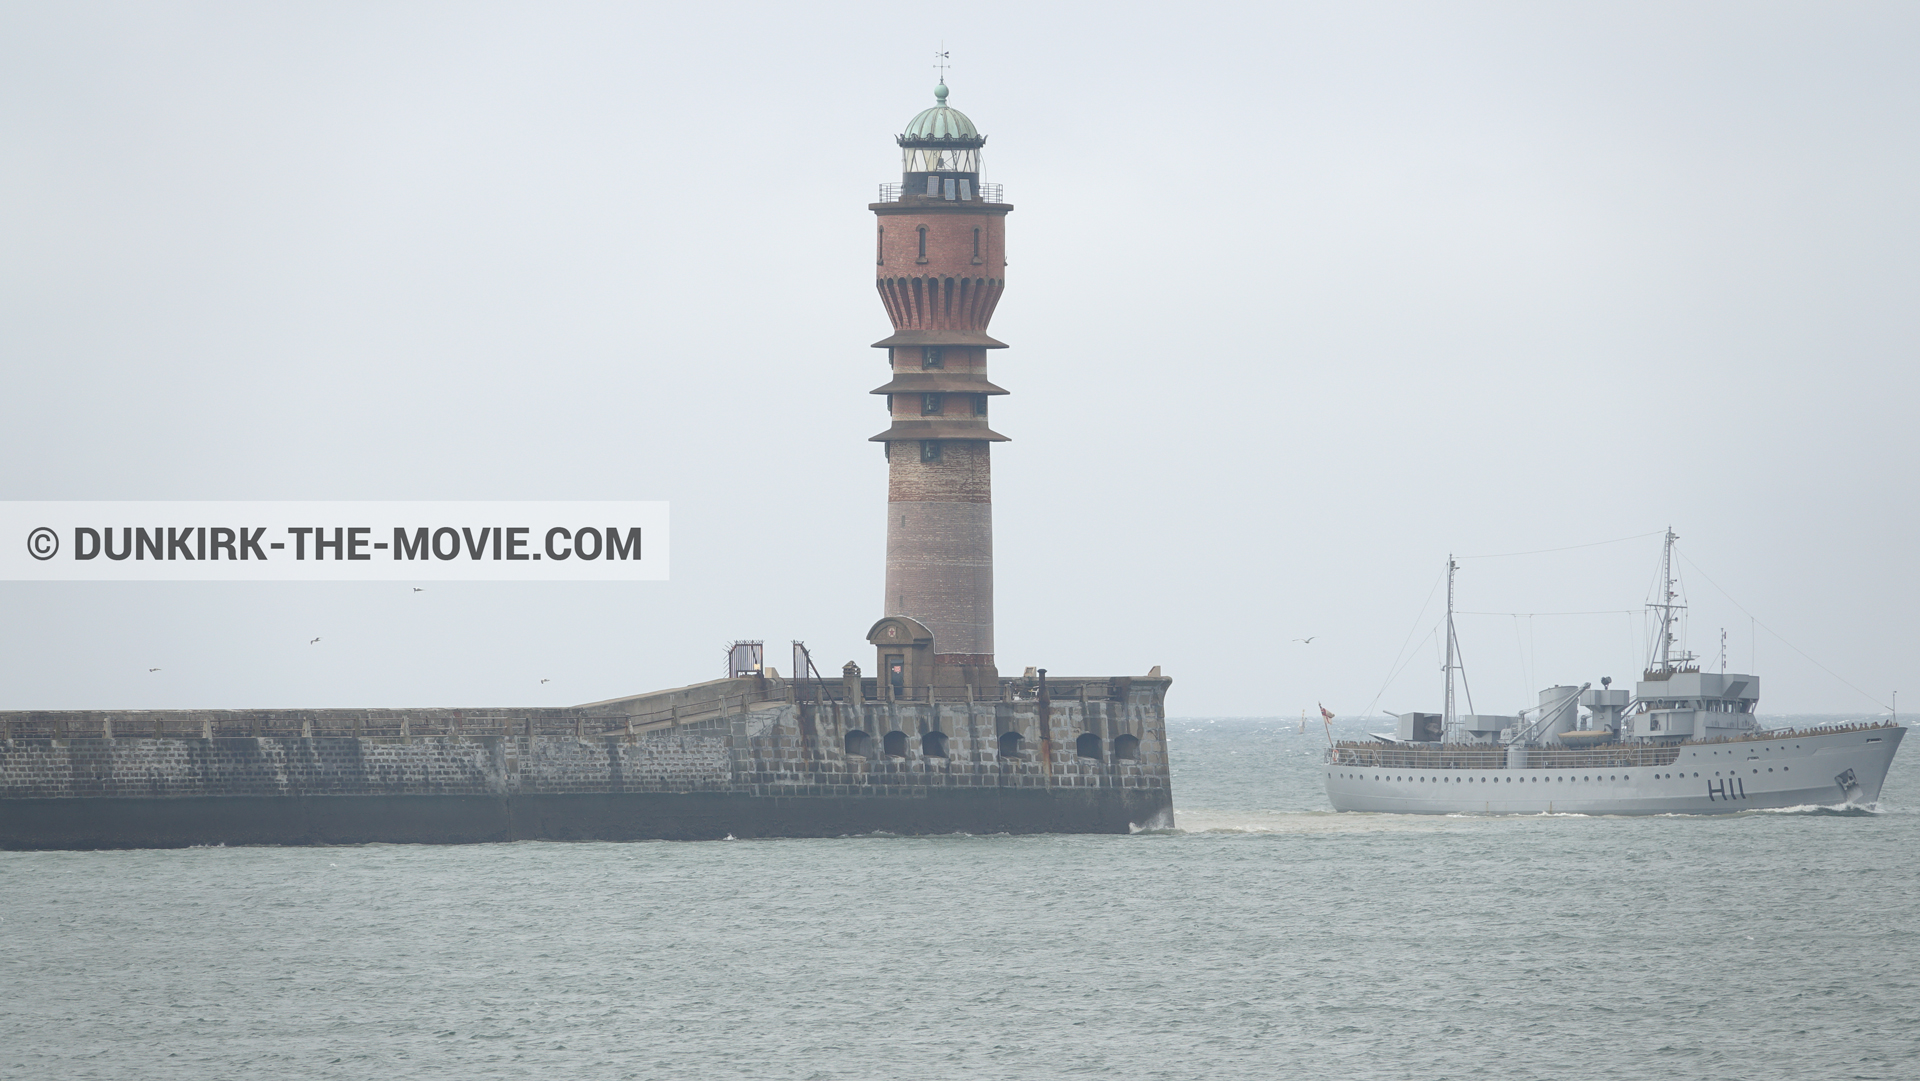 Picture with H11 - MLV Castor, St Pol sur Mer lighthouse,  from behind the scene of the Dunkirk movie by Nolan